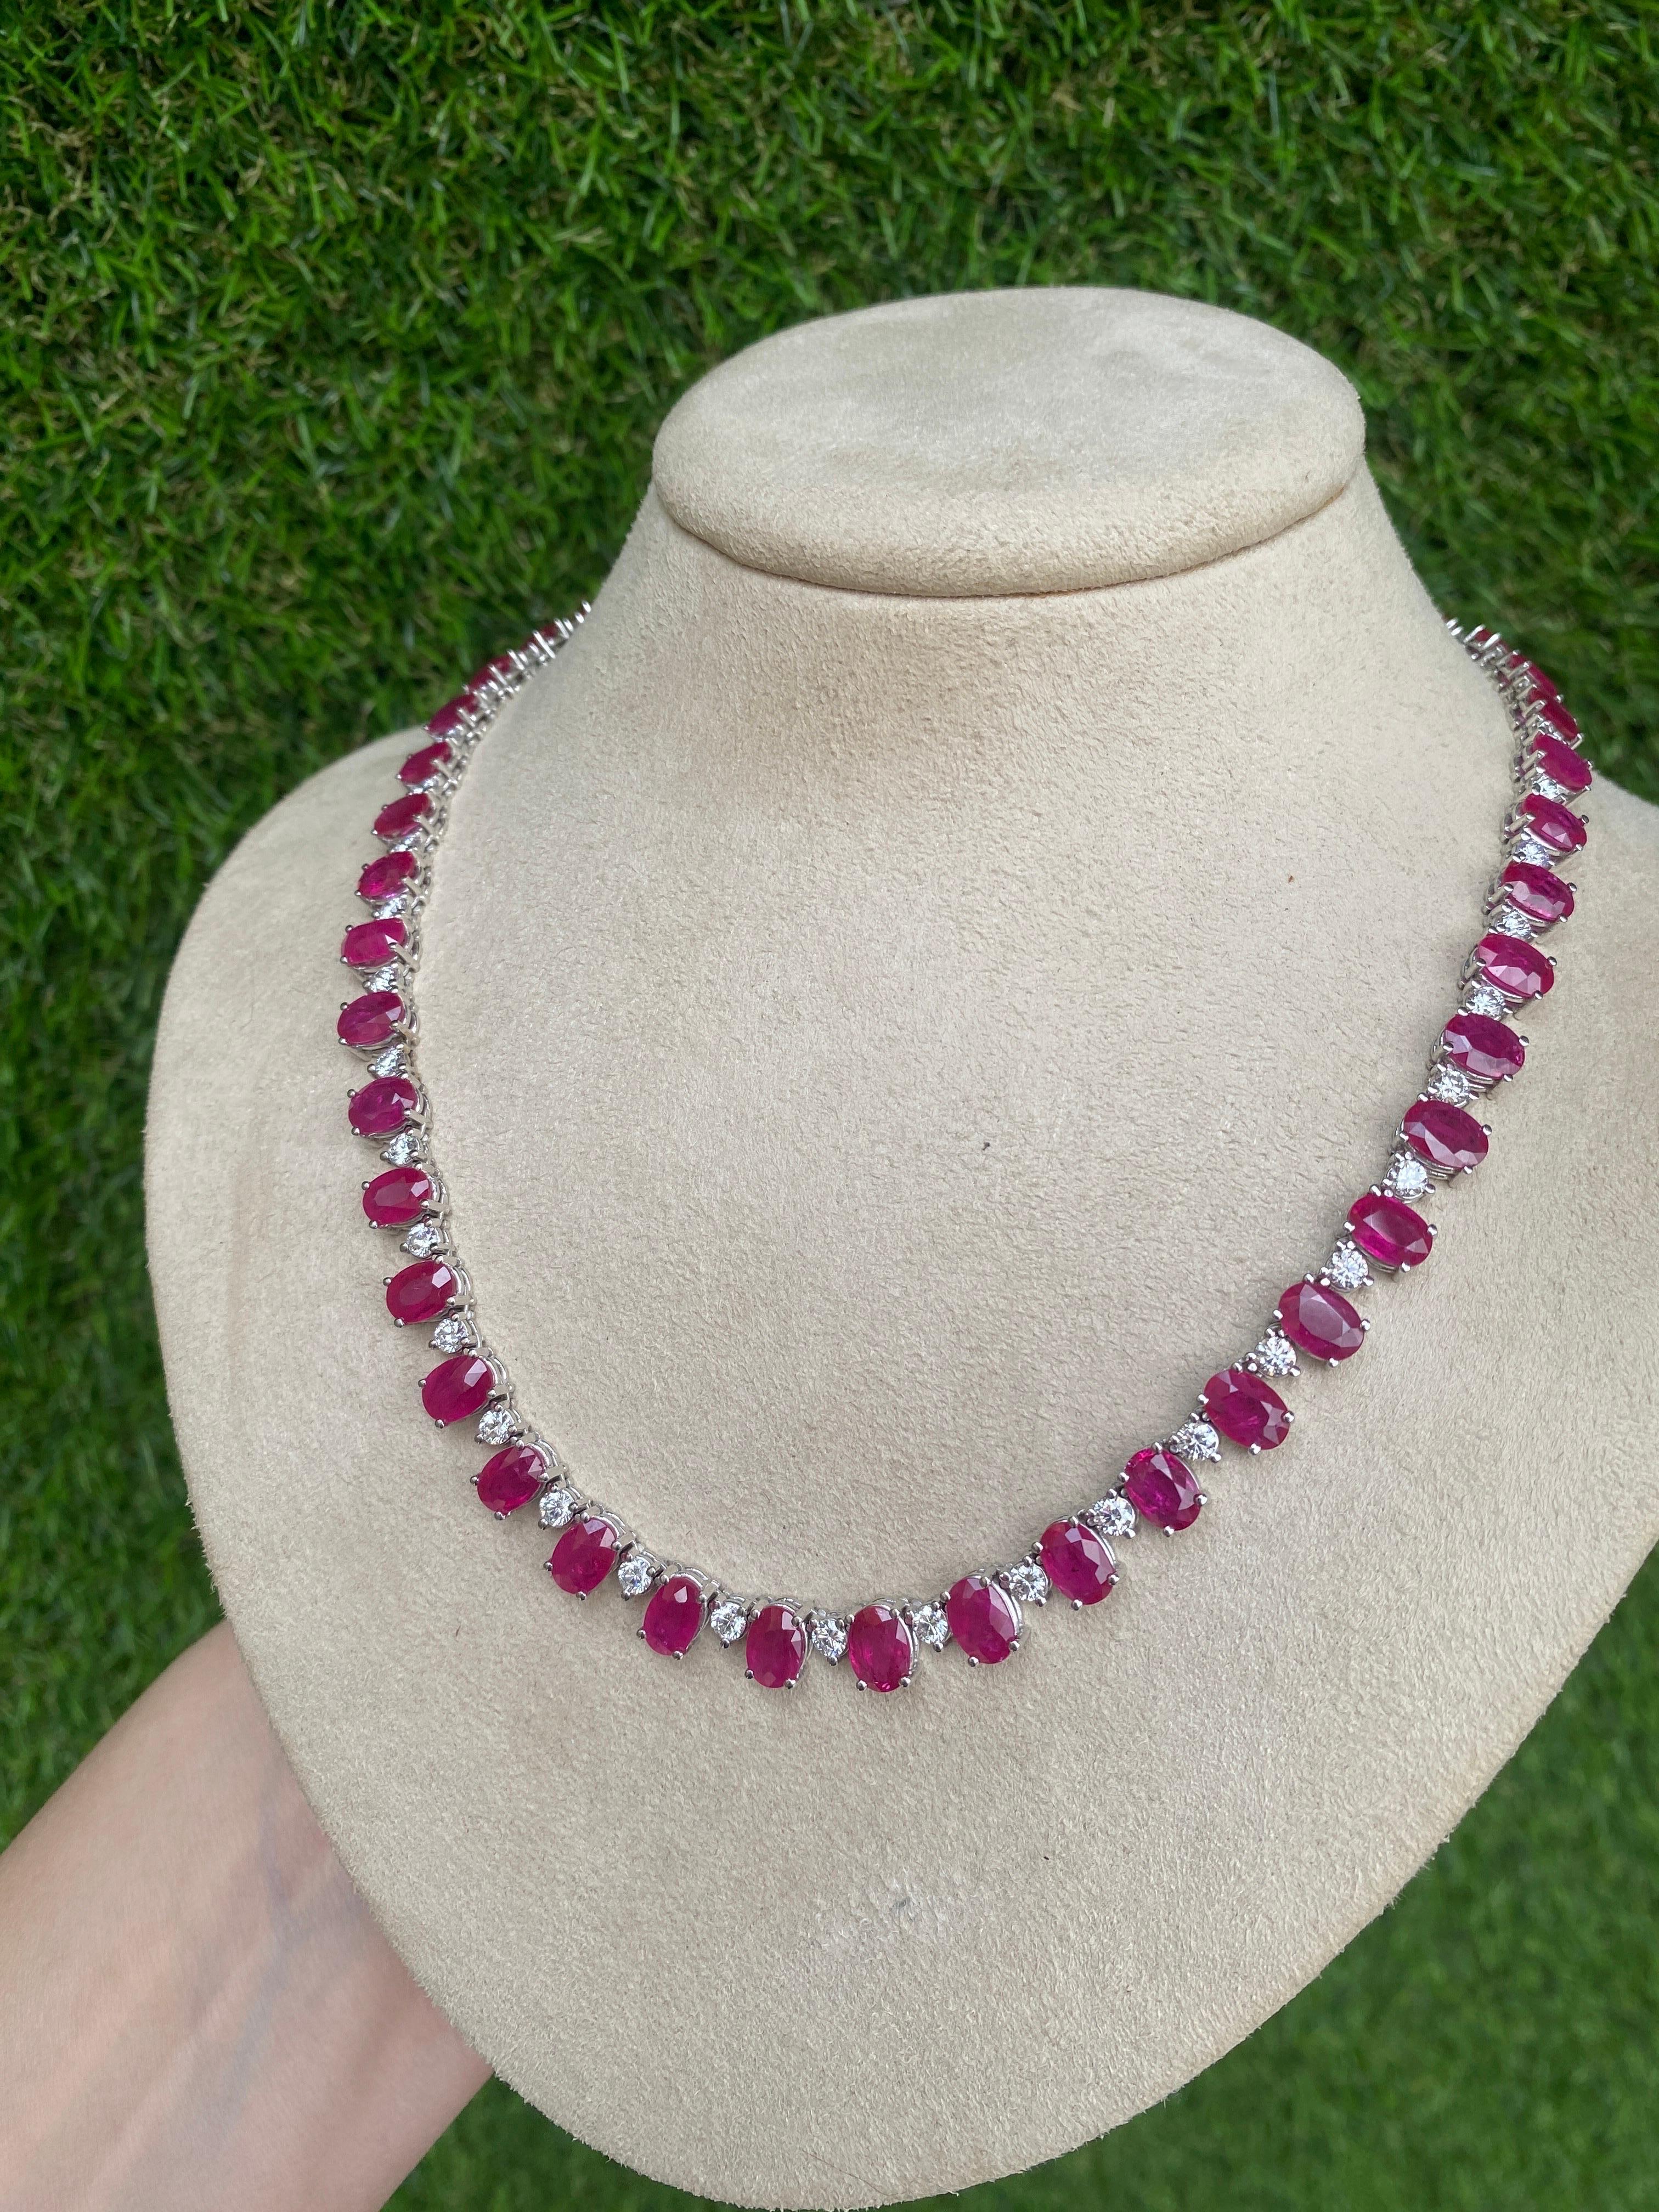 40.50ctw Natural Oval Cut Ruby & 5.20ctw Round Diamond Cocktail Necklace 9